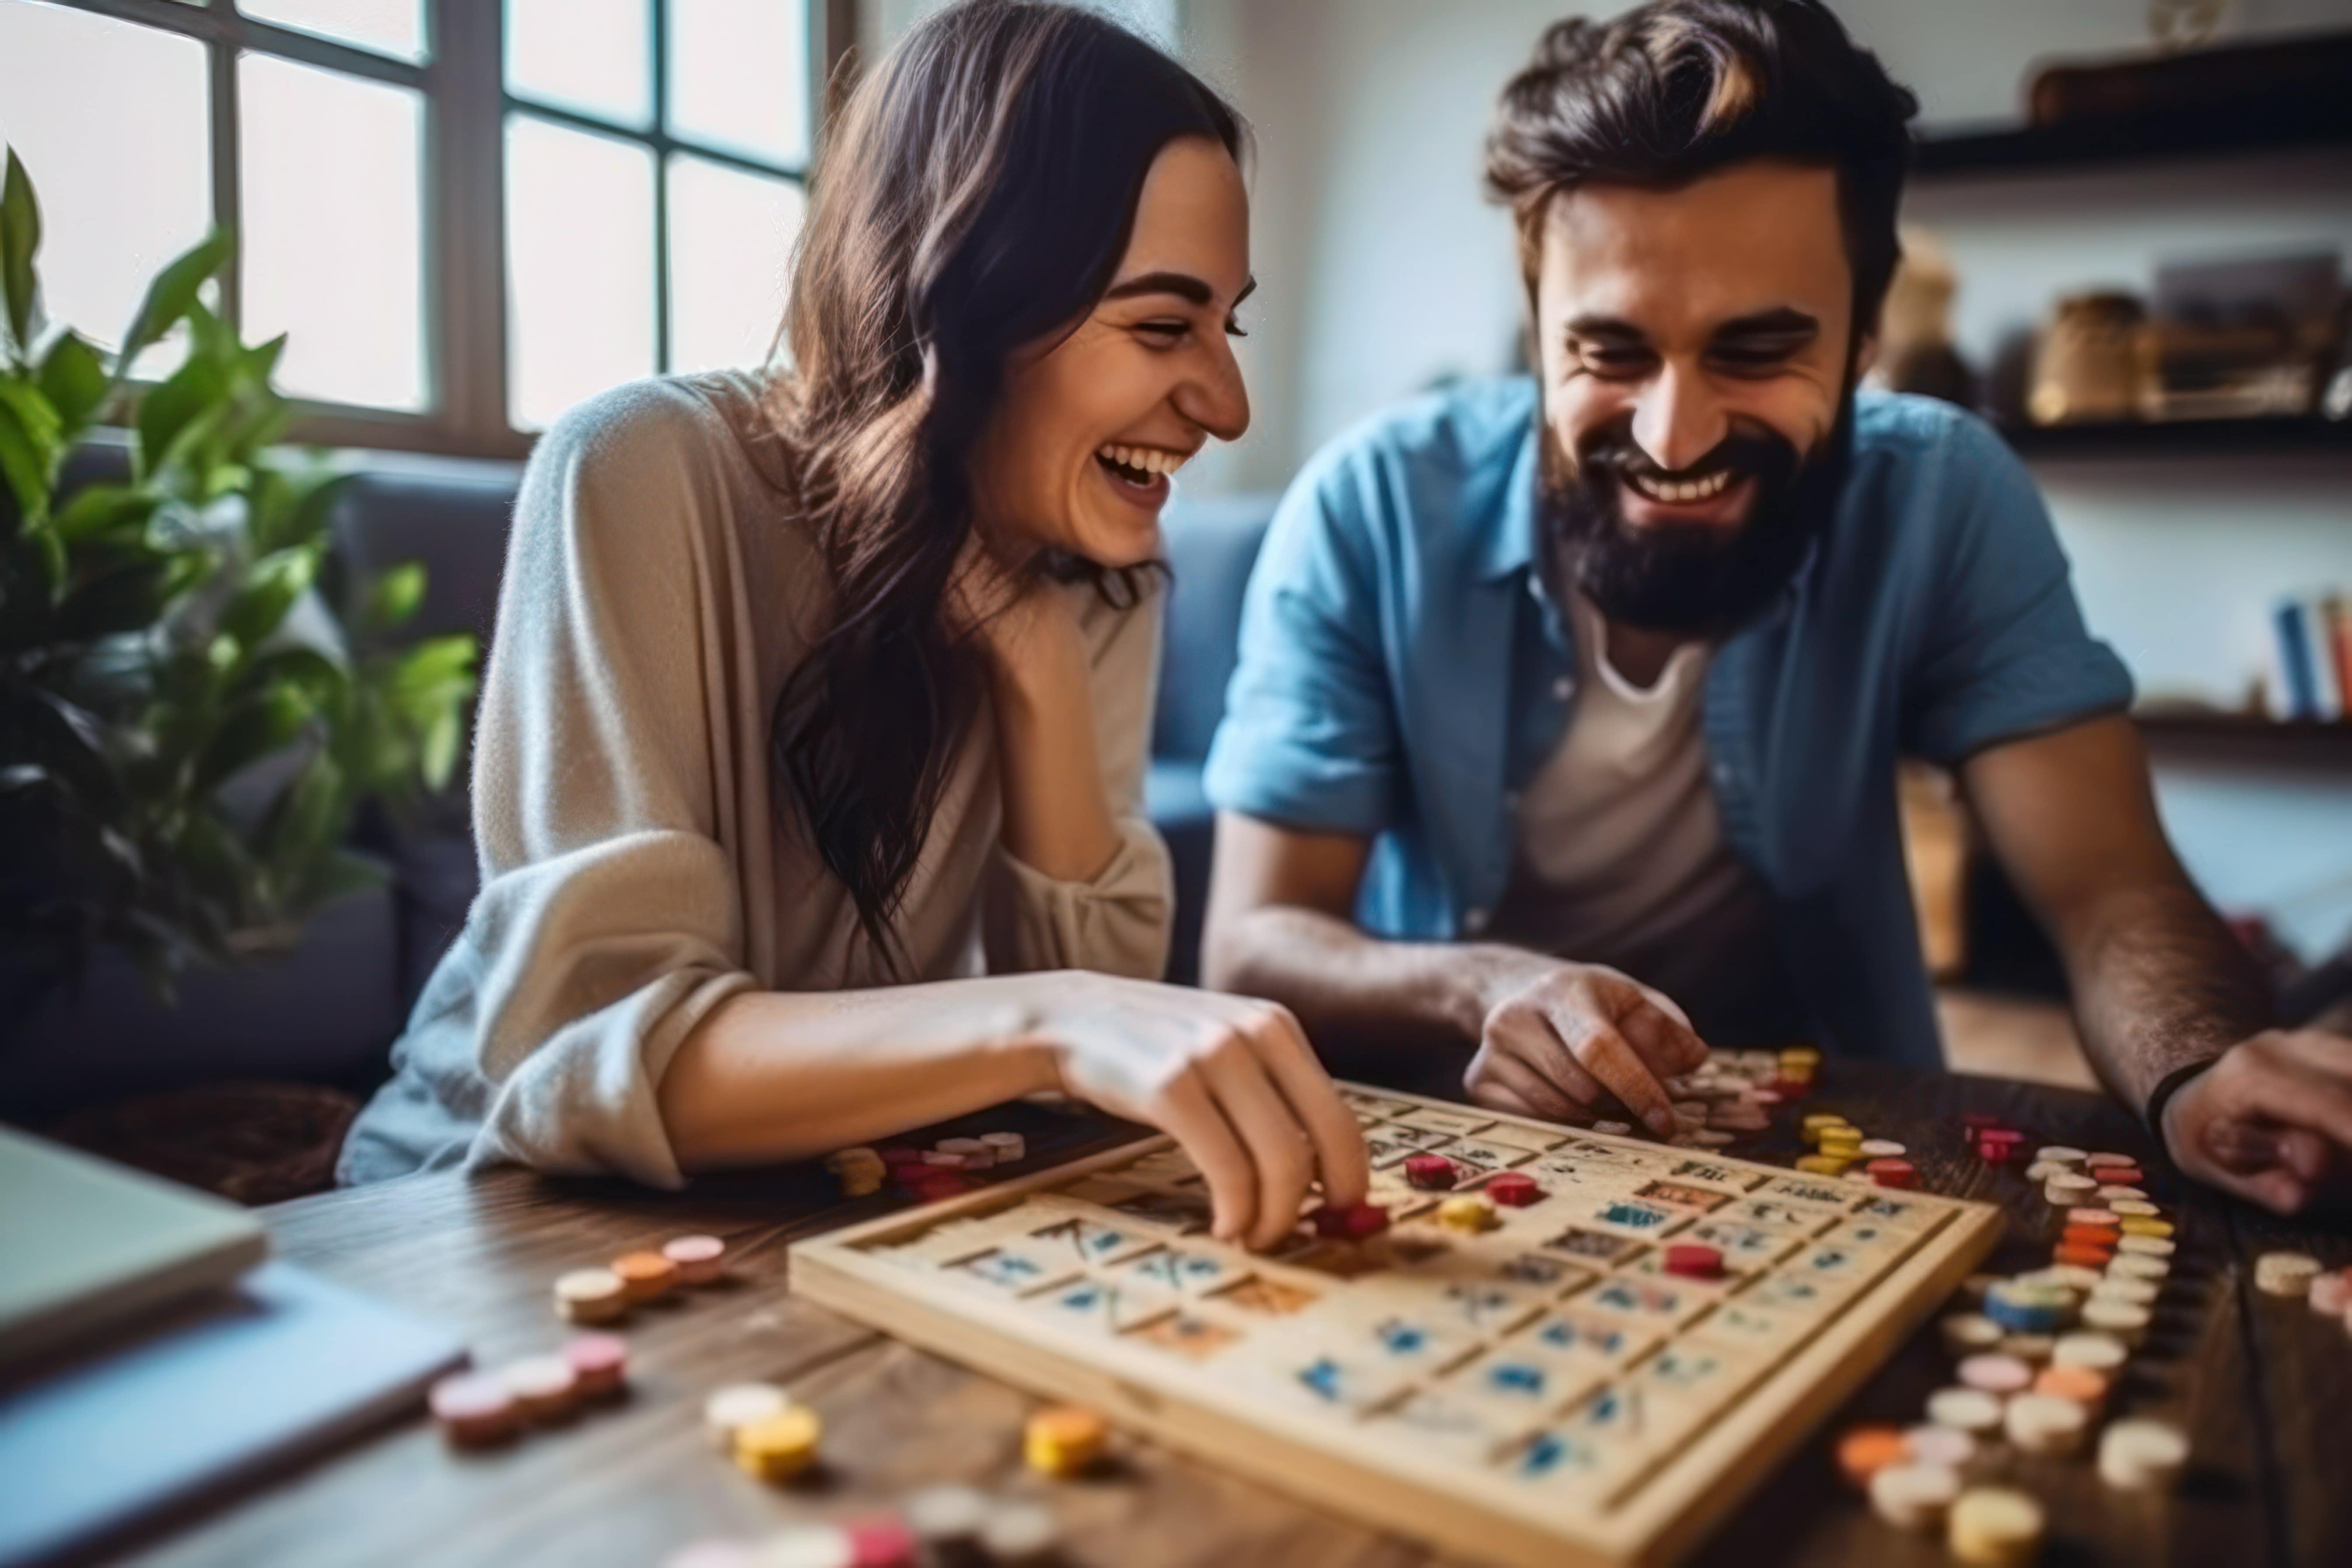 A couple smiling as they enjoy each other's company while having a board game date night at home.